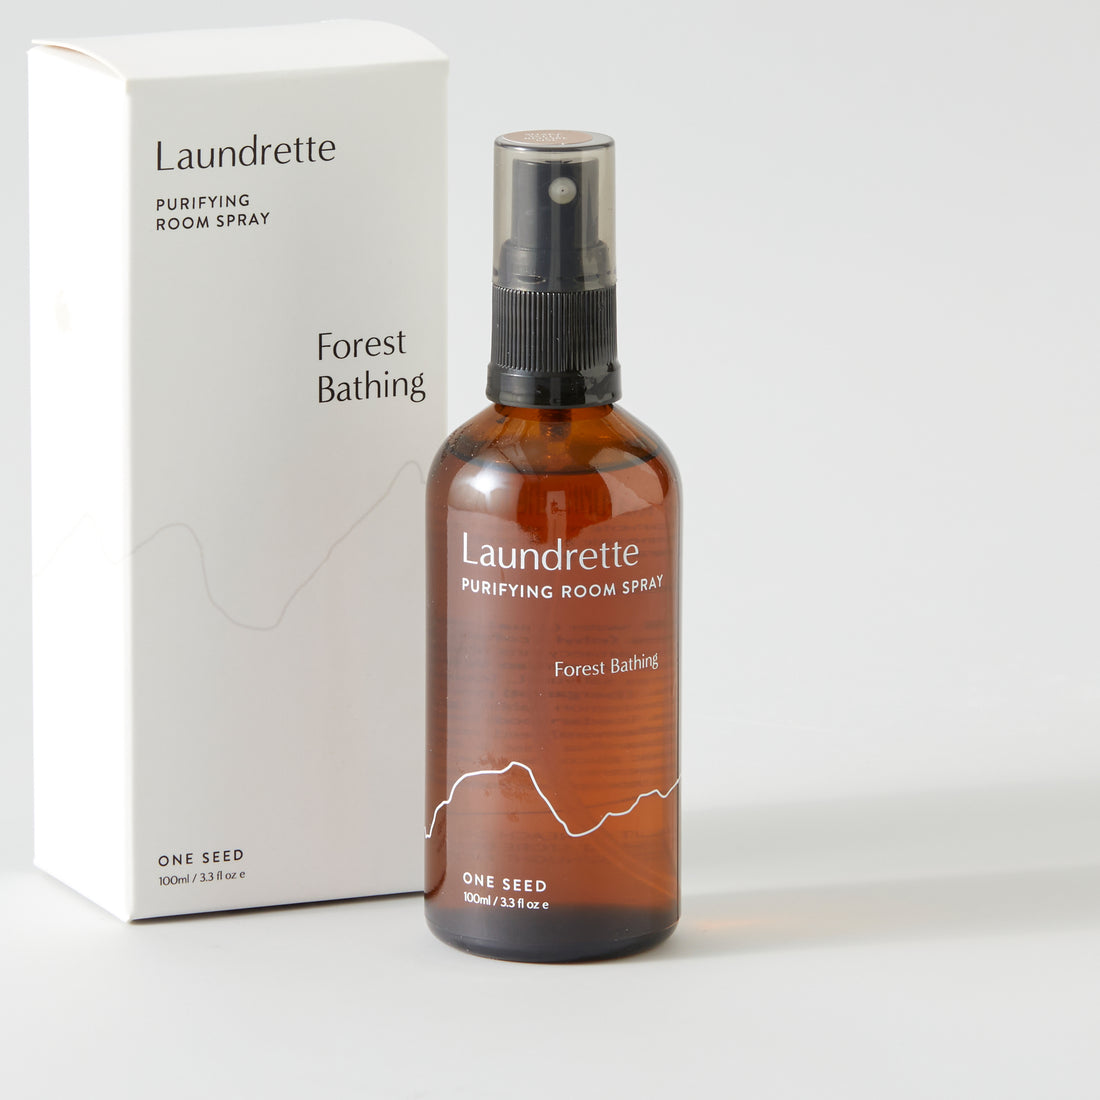 One Seed Laundrette Purifying Natural Room Spray – Forest Bathing